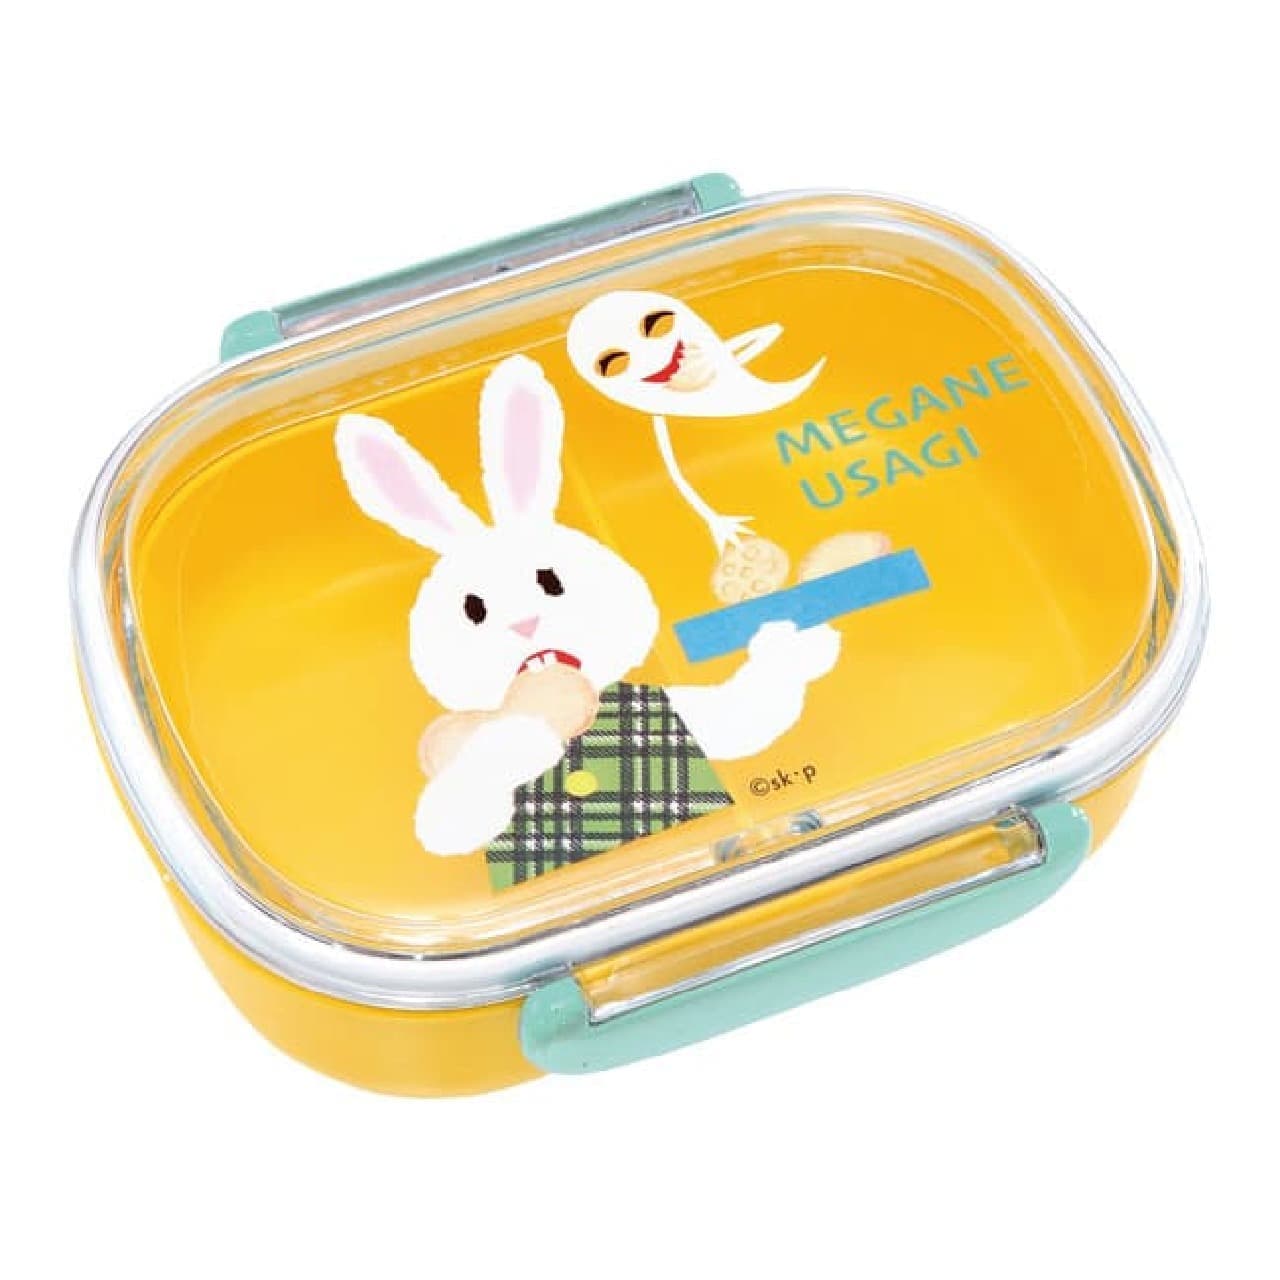 Keiko Sena's popular works are now available as lunchware! The "Megane Usagi" and "Ghostly Tempura" lunchboxes, drawers, etc.